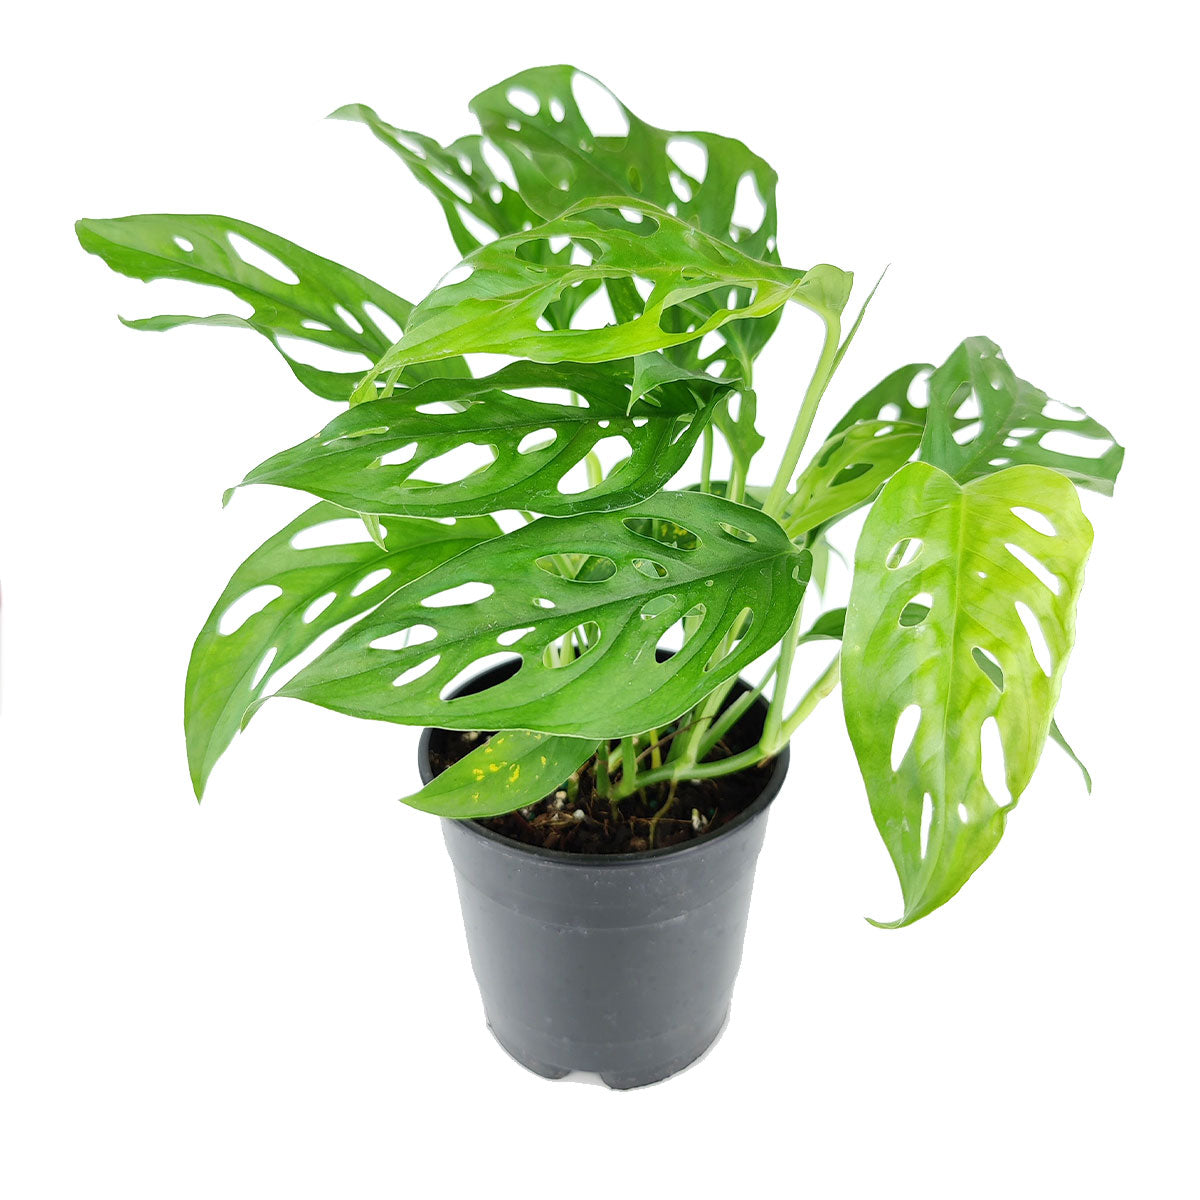 Swiss Cheese plant, Monstera adansonii, Monstera plant, plant with lacy leaves, best air-purifying plant, vining Monstera for hanging baskets 